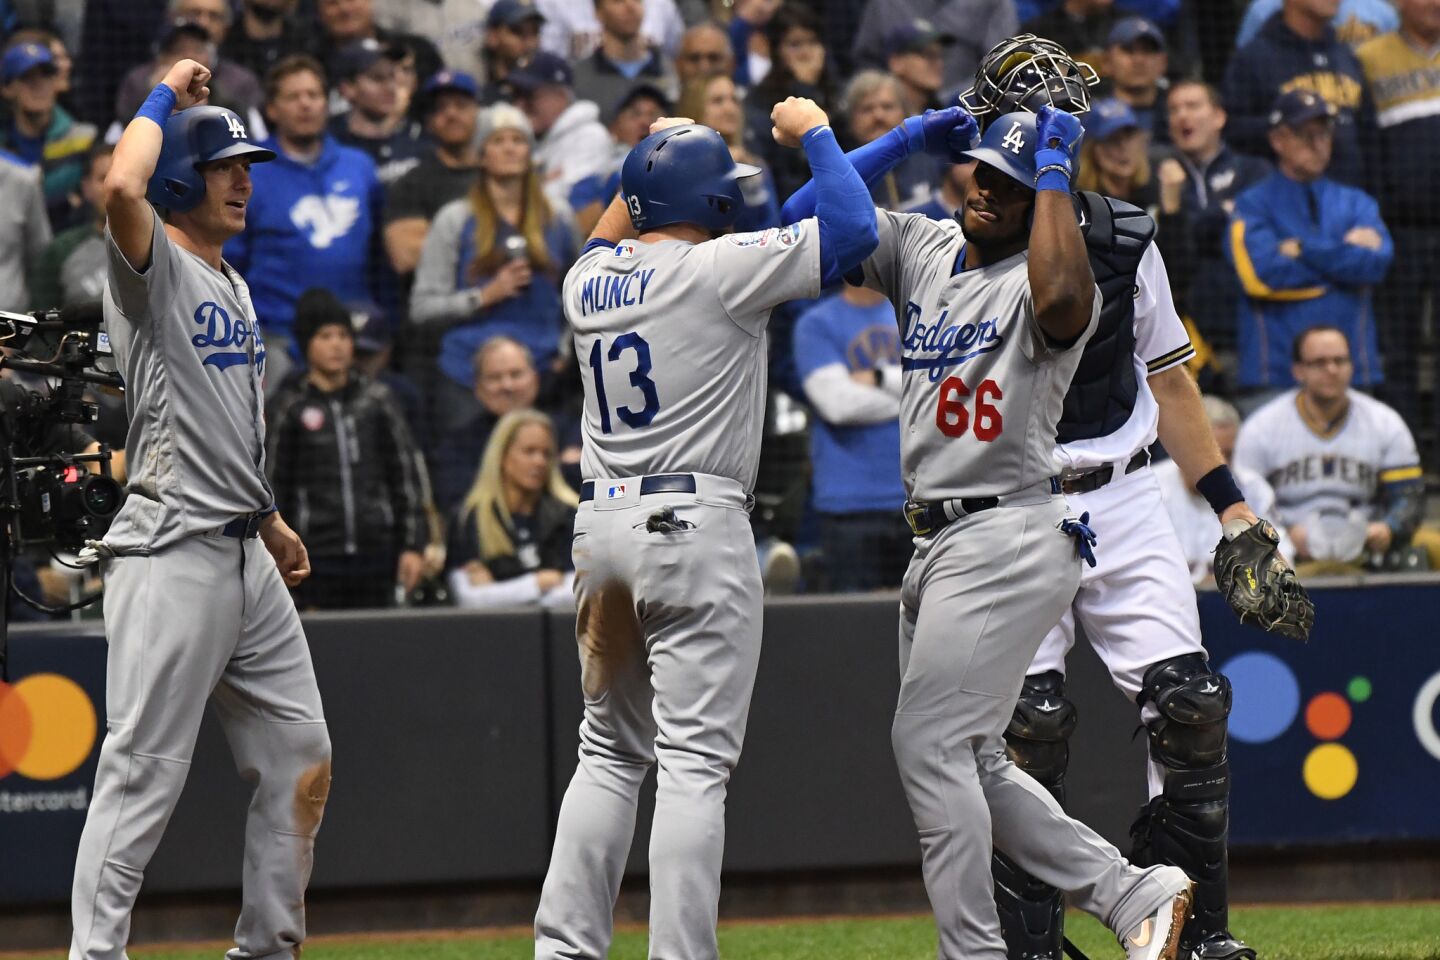 Dodgers Yasiel Puig celebrates with Max Muncy after hitting a three run home run in the 6th inning.